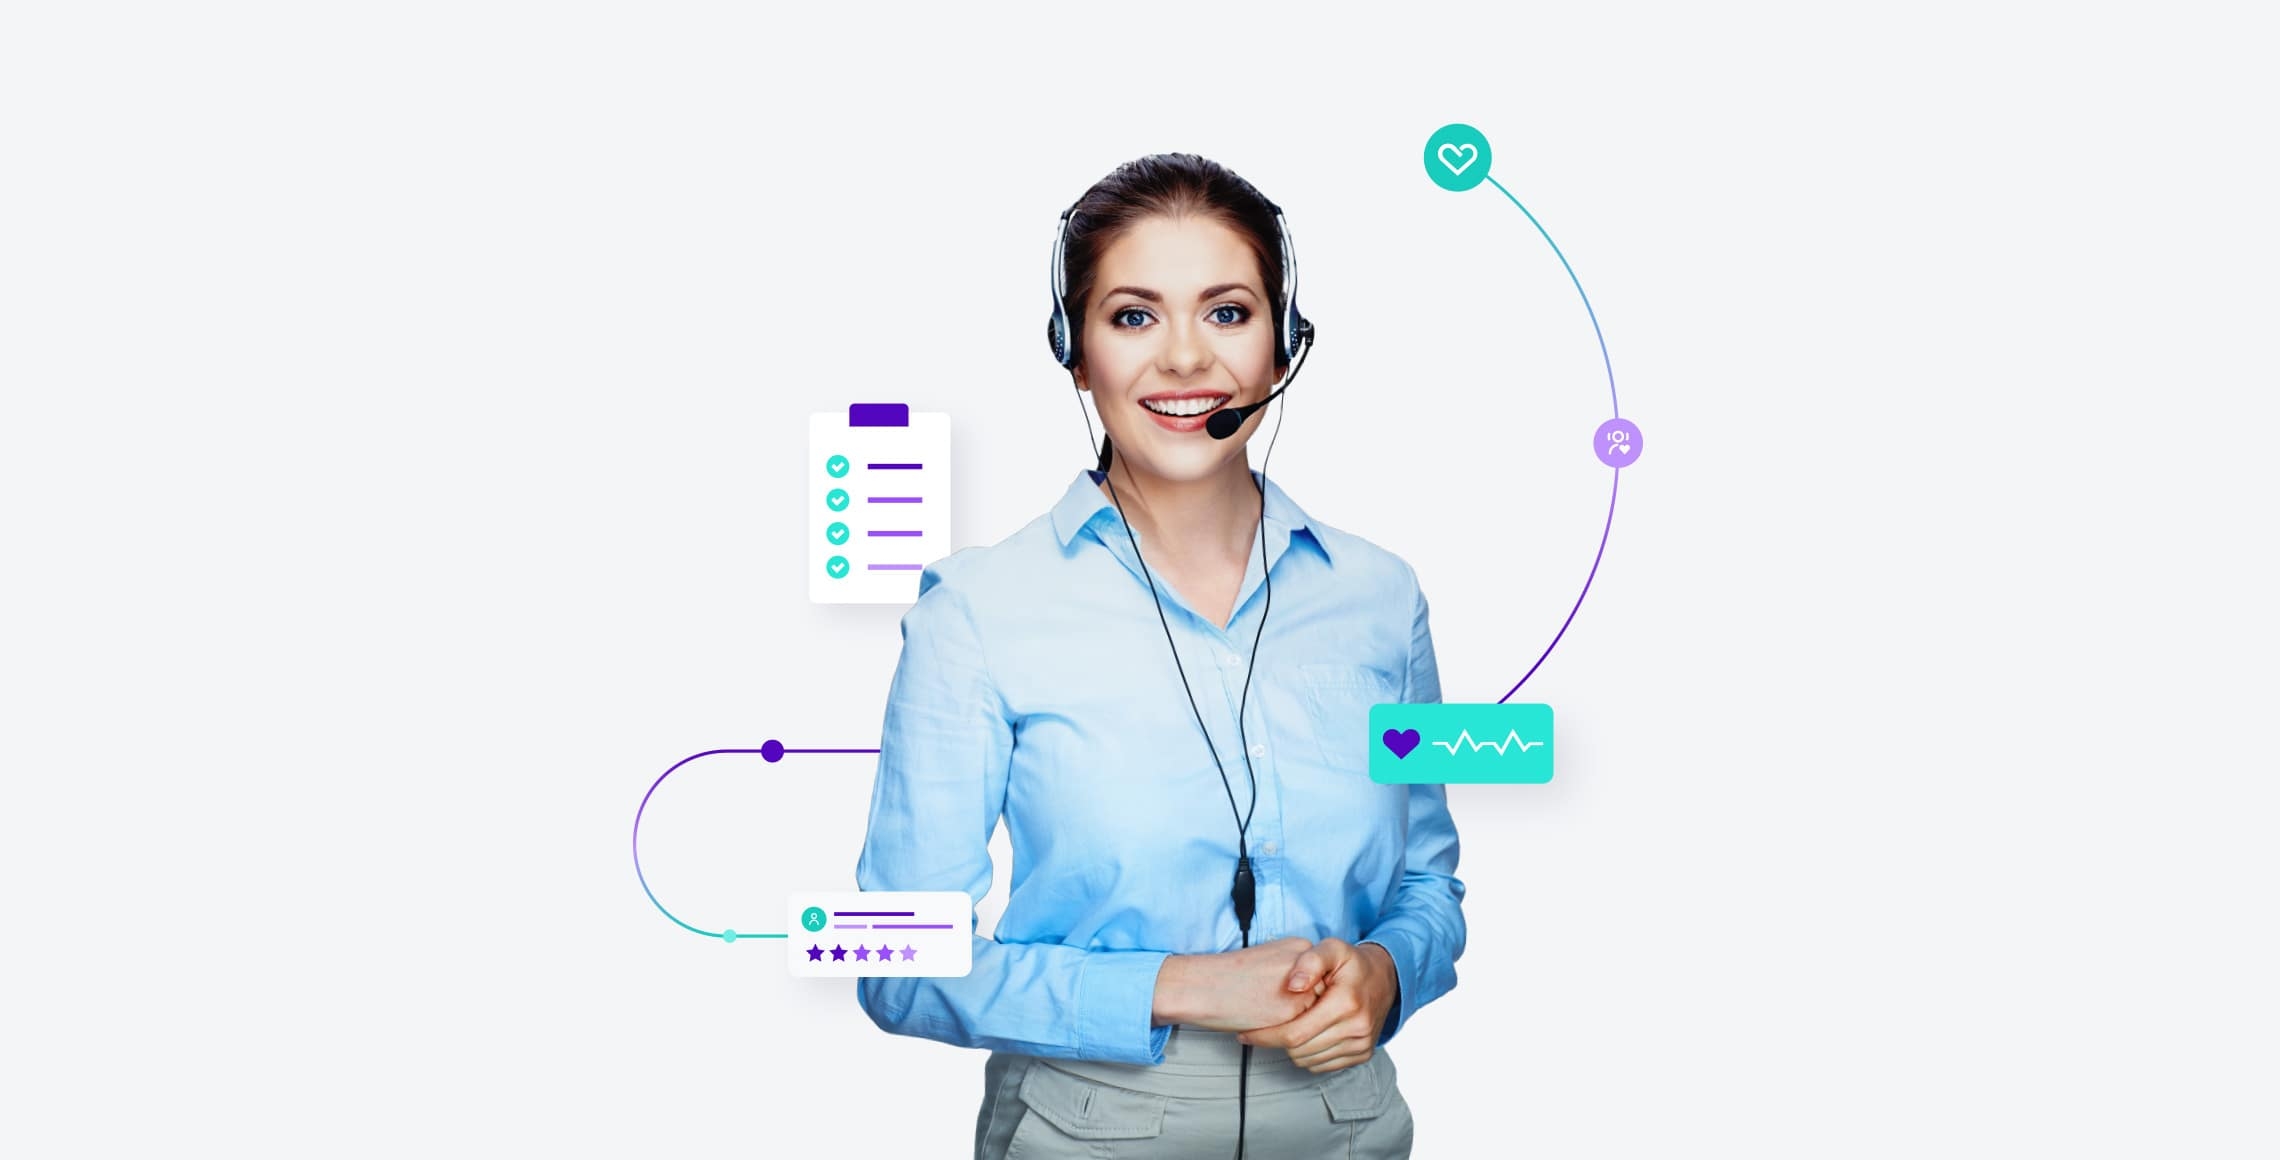 Employee Empowerment In A Healthcare Contact Center